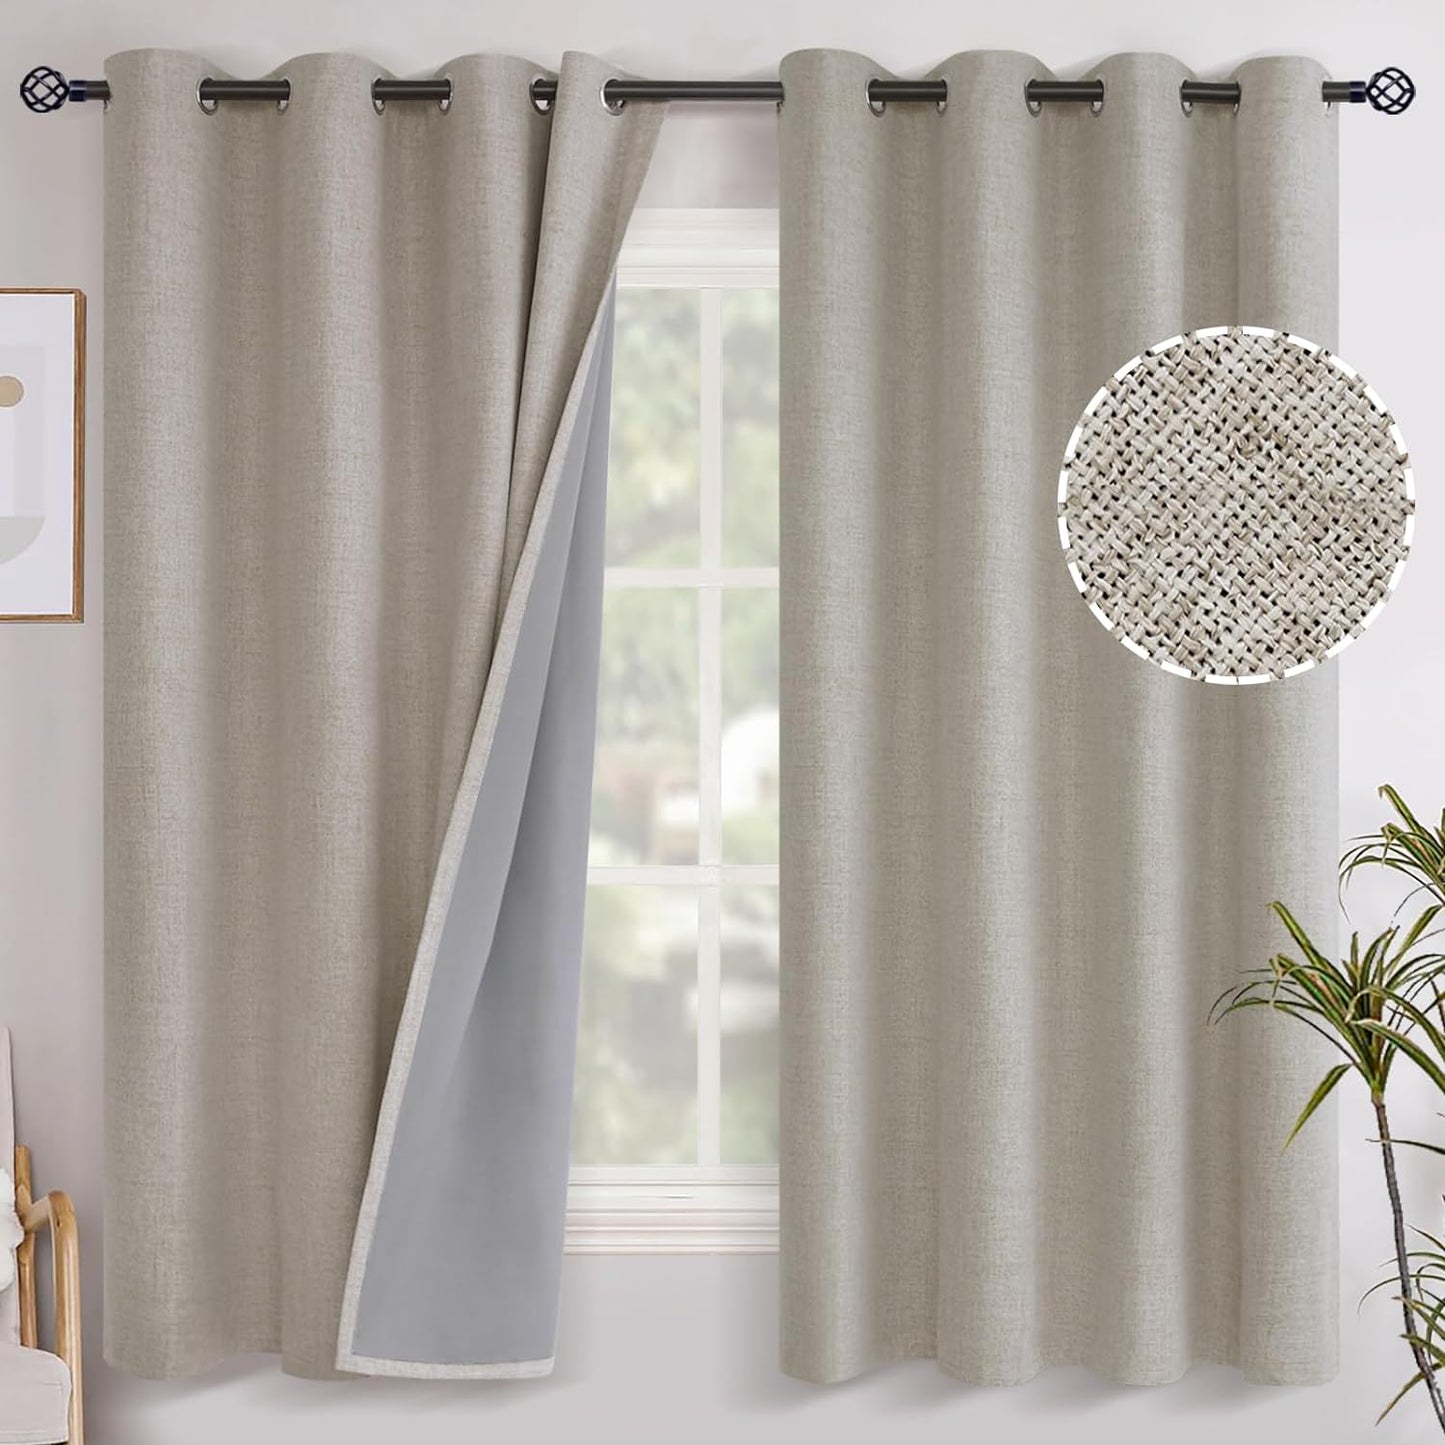 Youngstex Linen Blackout Curtains 63 Inch Length, Grommet Darkening Bedroom Curtains Burlap Linen Window Drapes Thermal Insulated for Basement Summer Heat, 2 Panels, 52 X 63 Inch, Beige  YoungsTex Cashmere 52W X 63L 